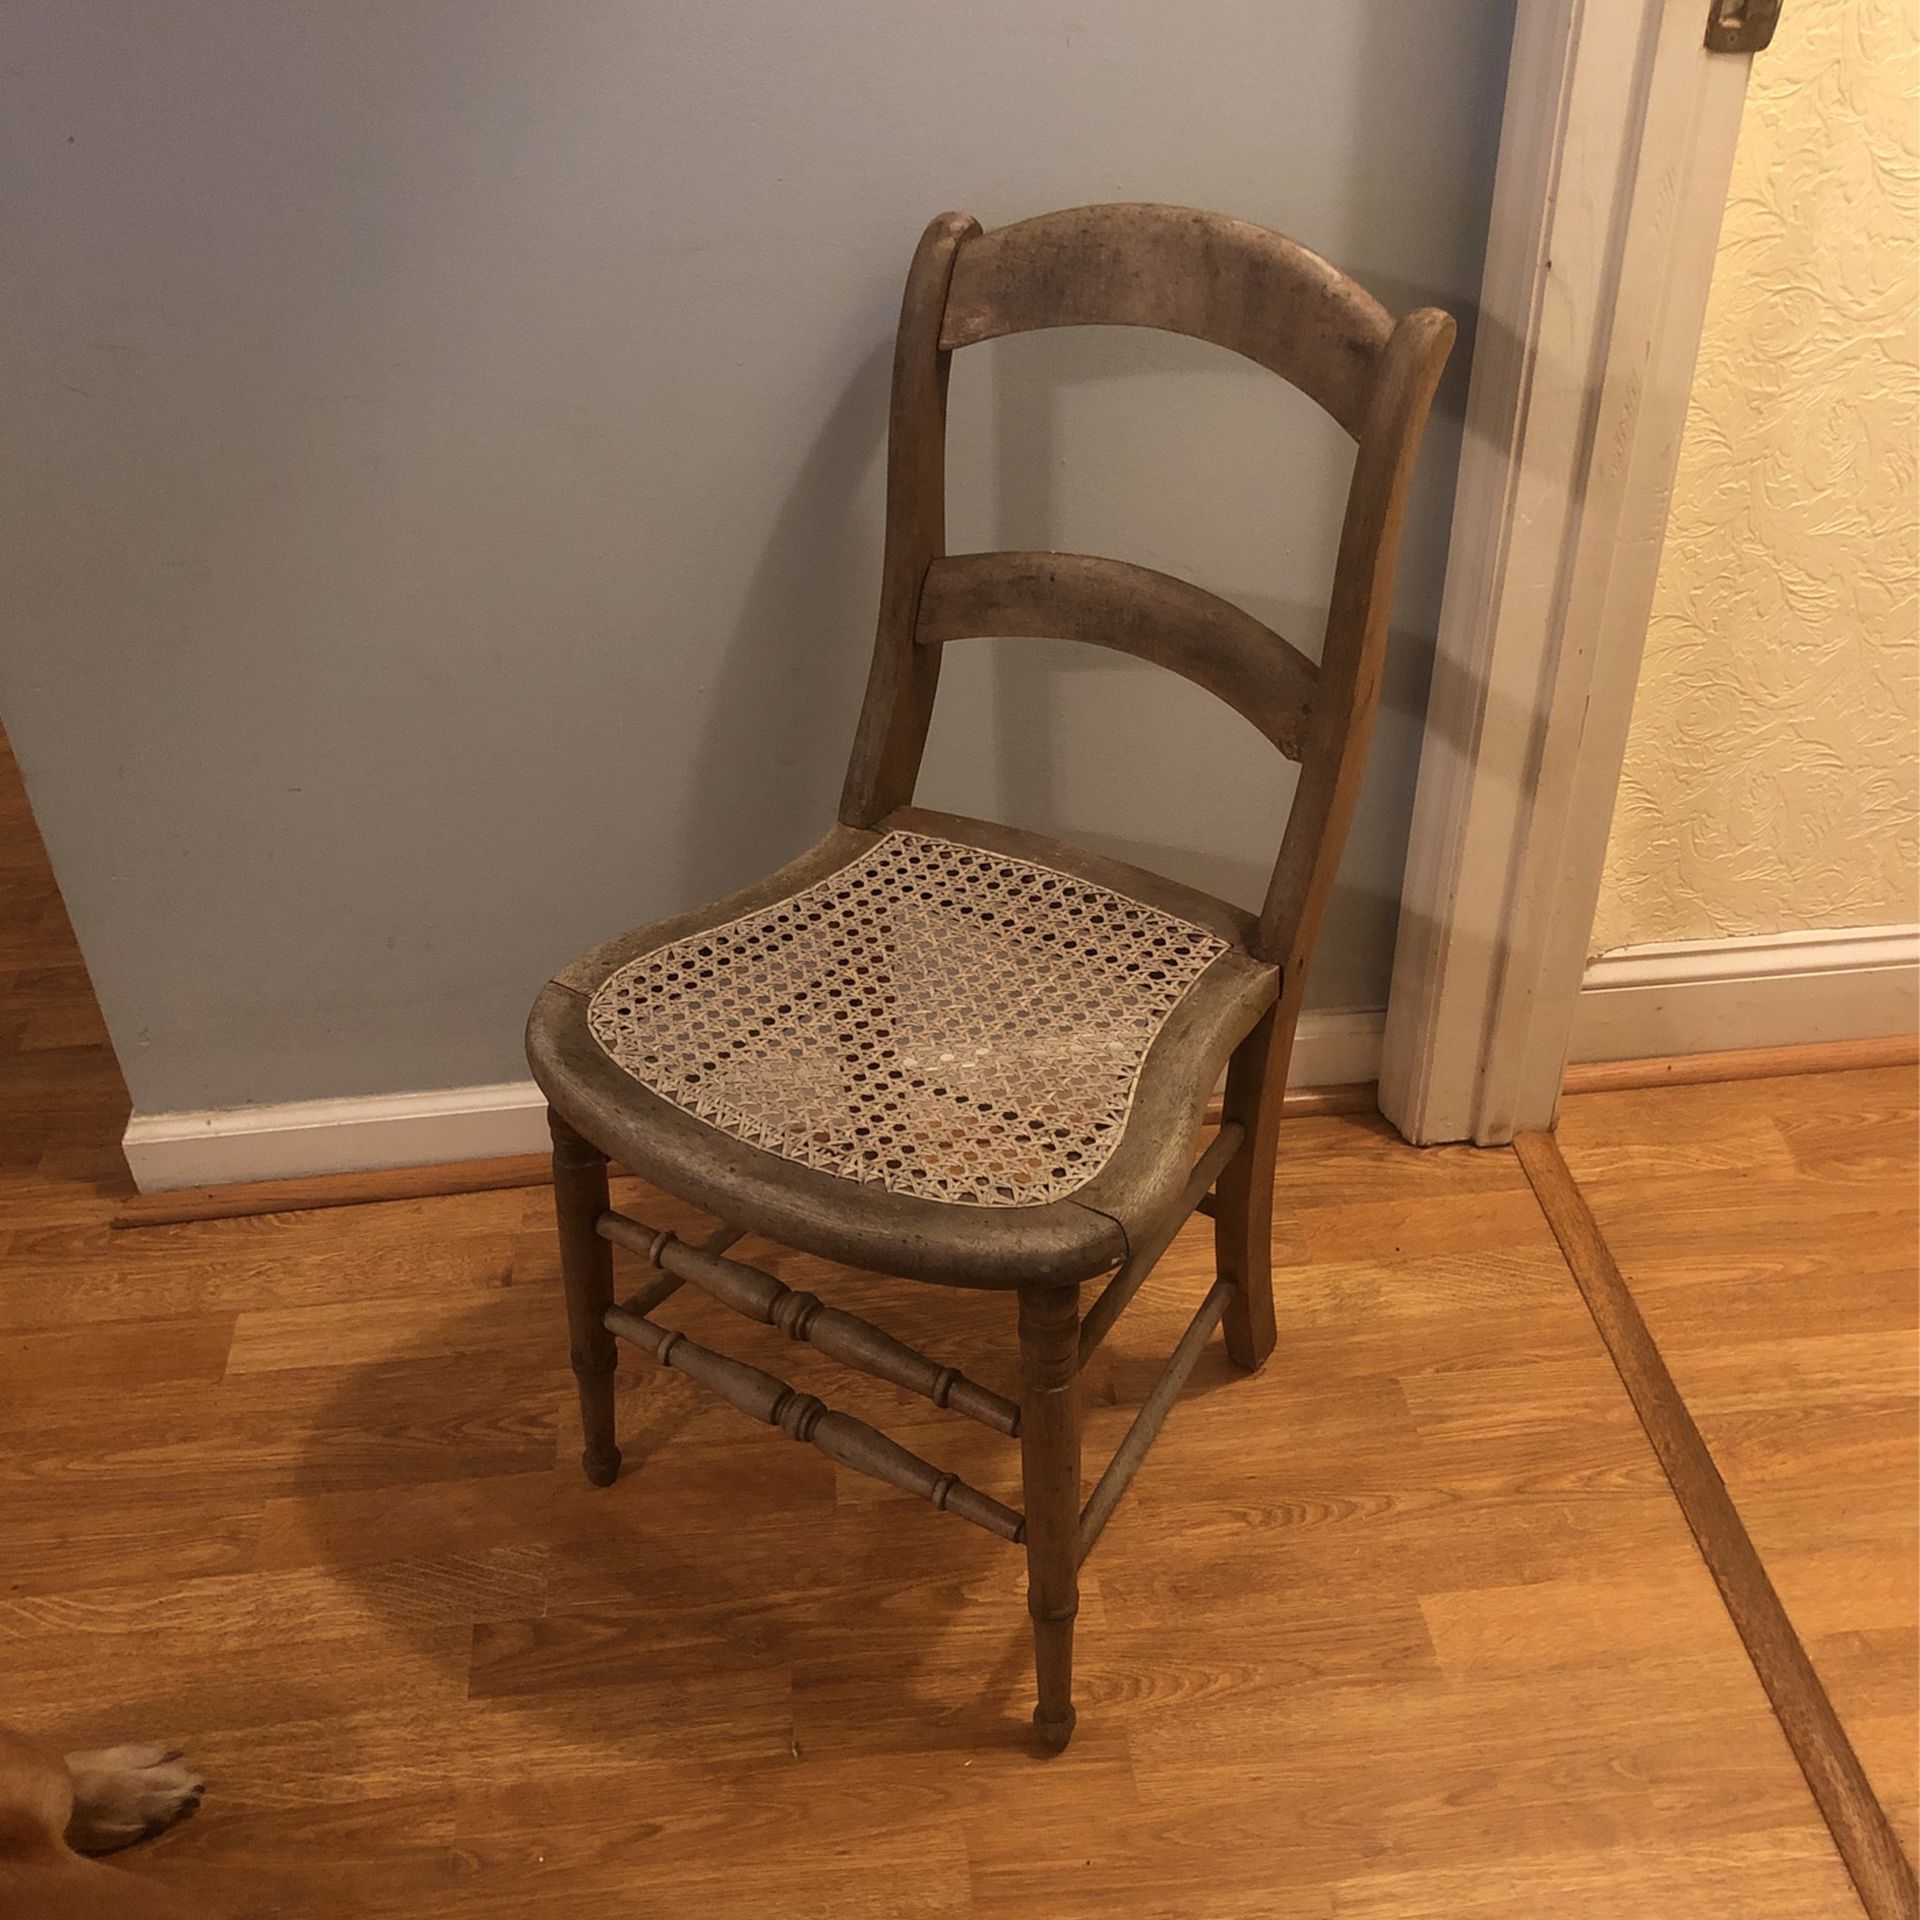 Vintage Cane Wooden Chair